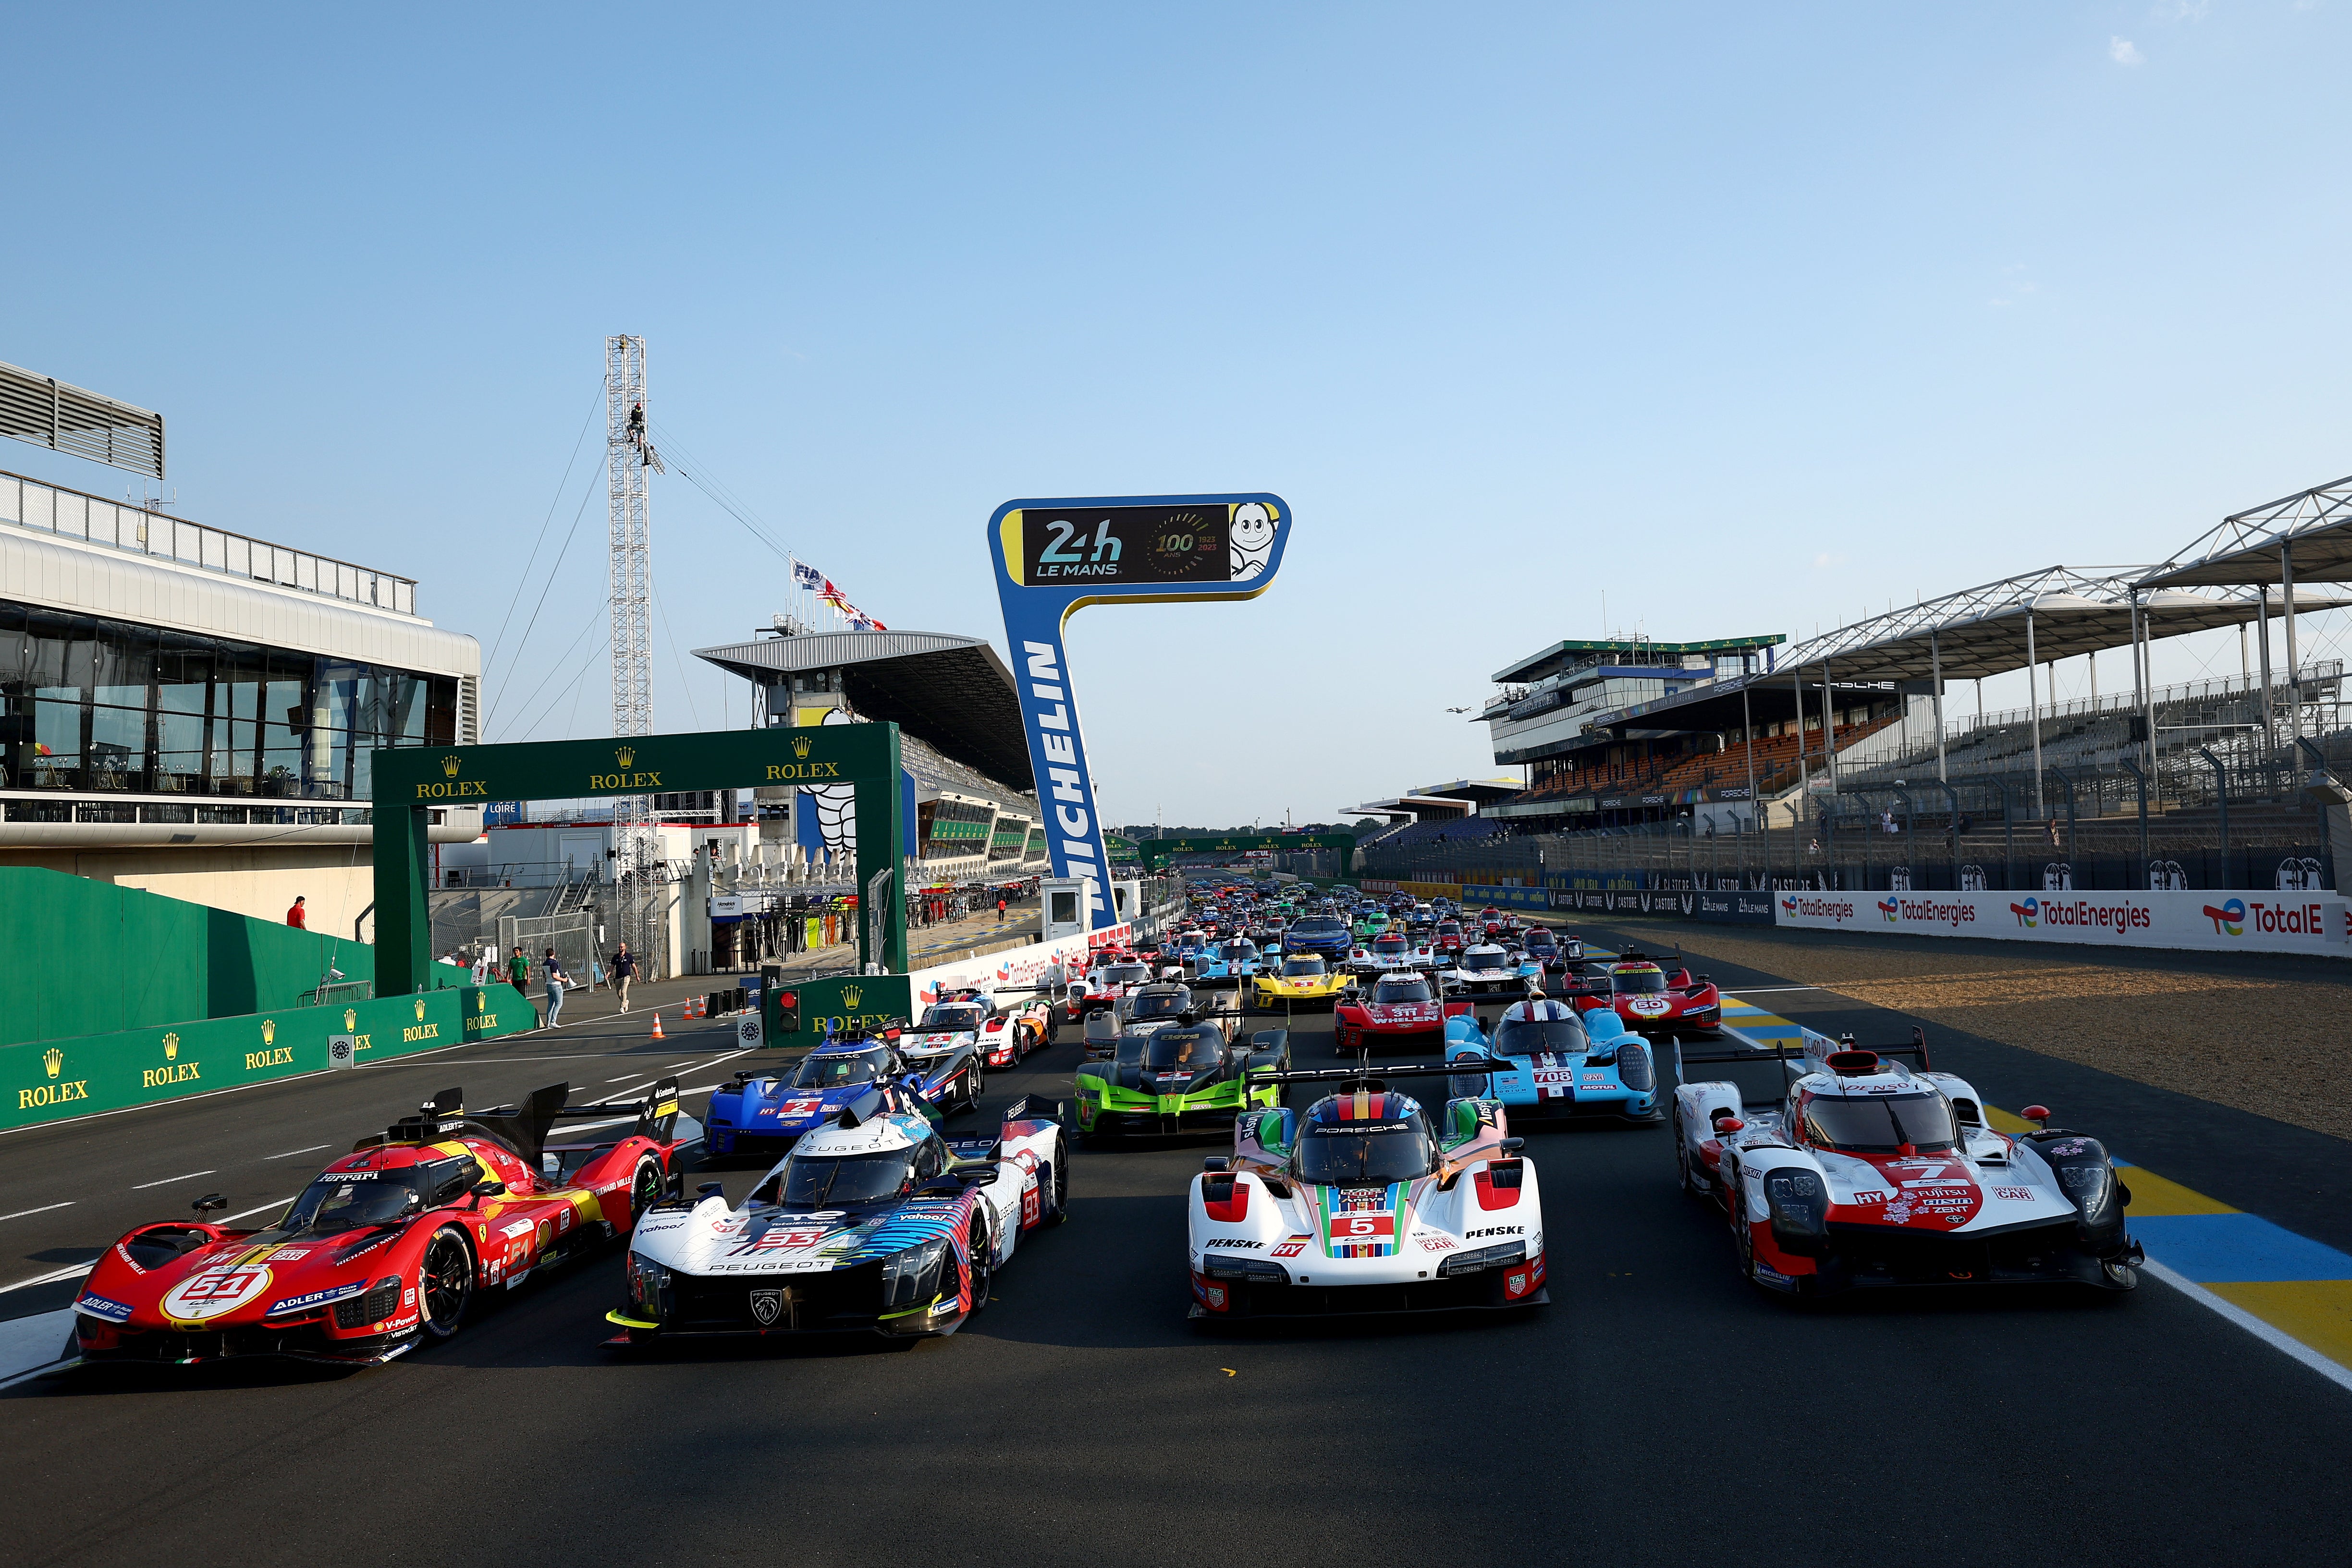 24 hours of Le Mans: How to watch, start time, schedule and live